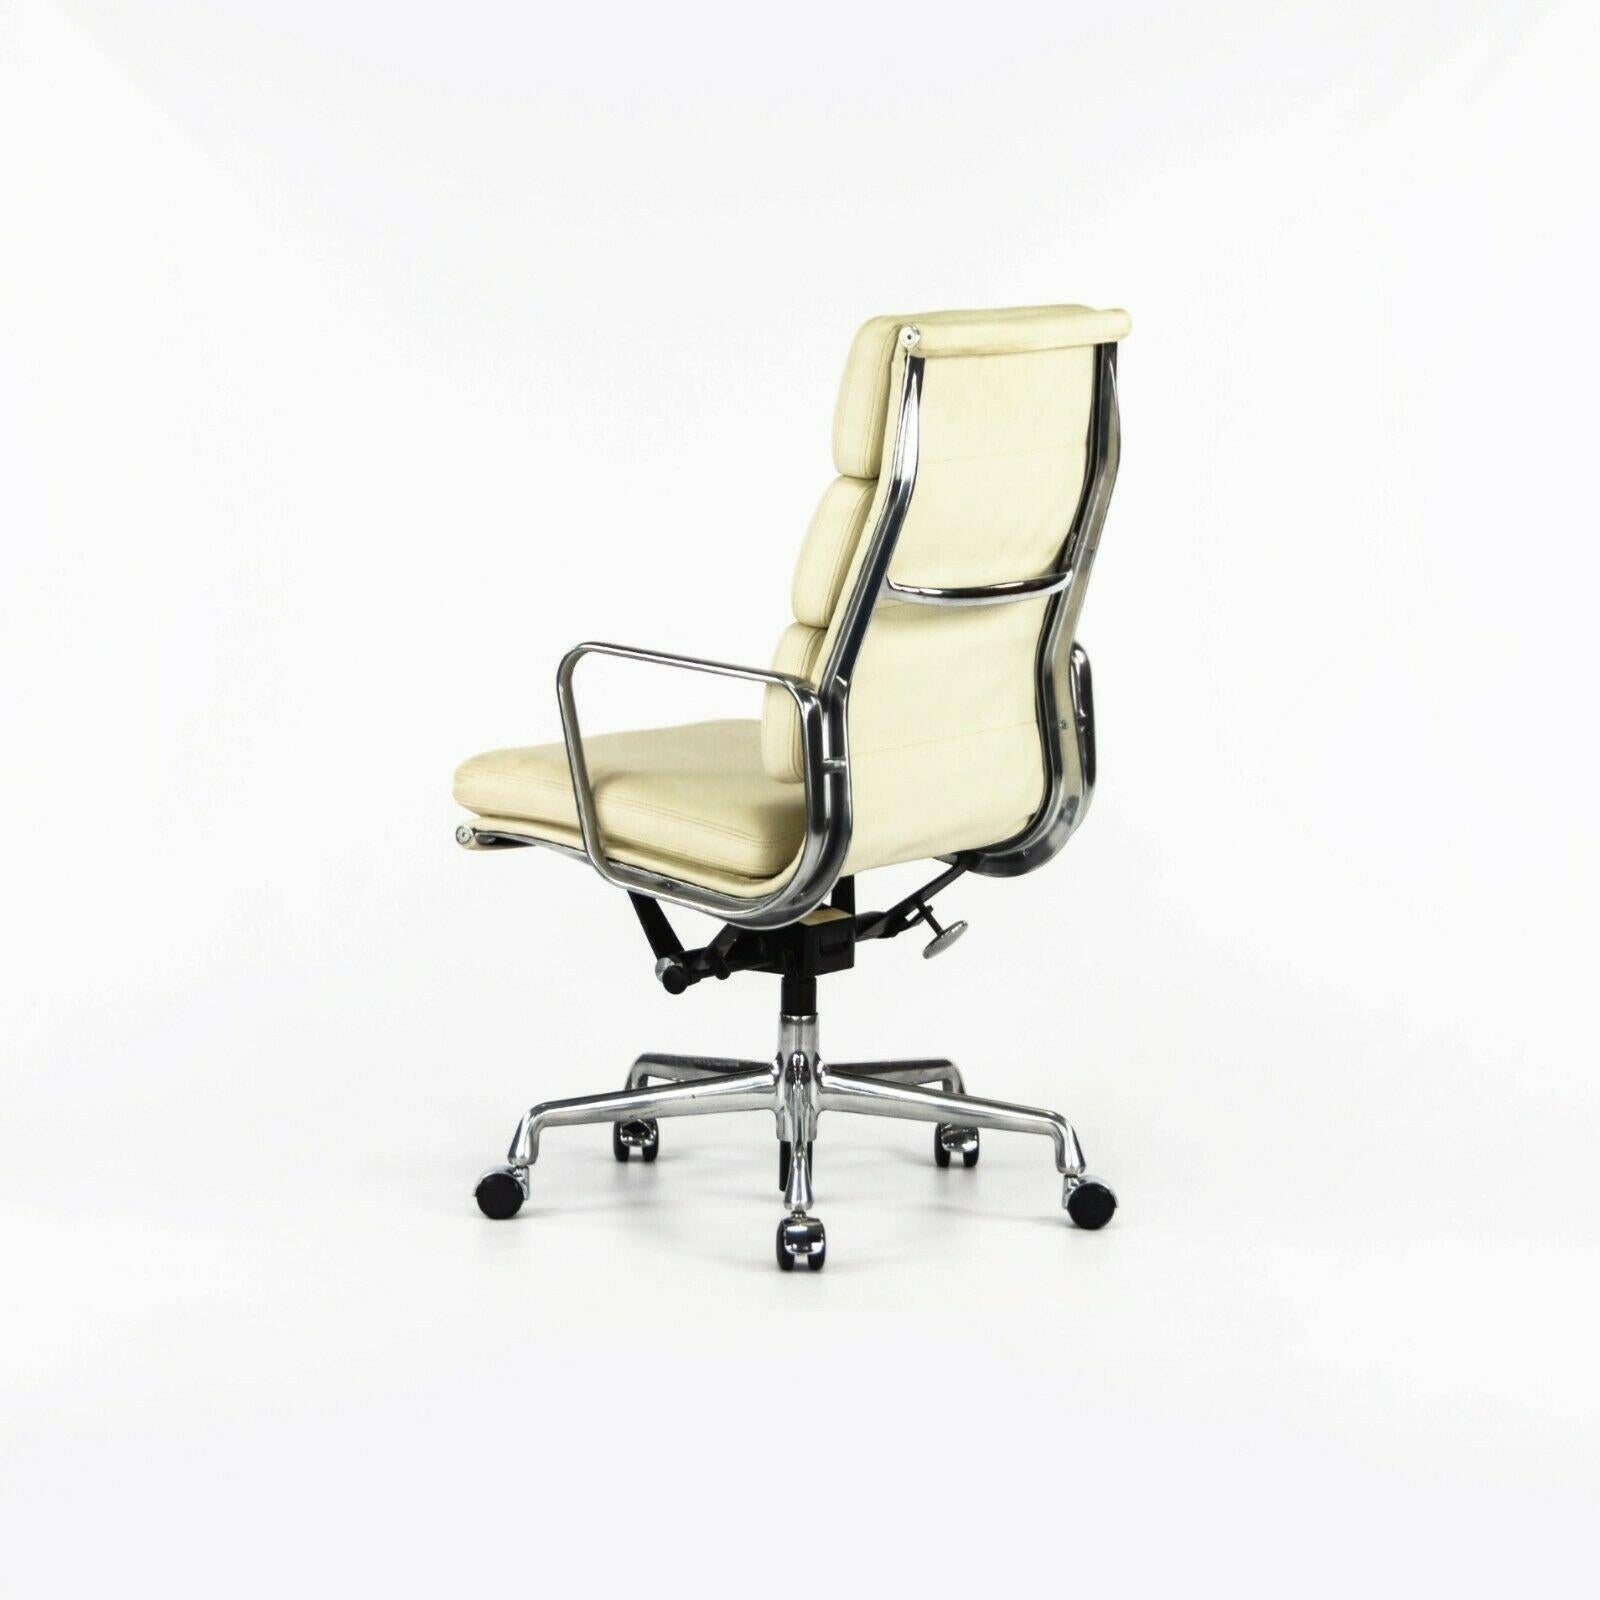 2011 Herman Miller Eames Aluminum Group Executive Soft Pad Desk Chair Ivory 12+ 1